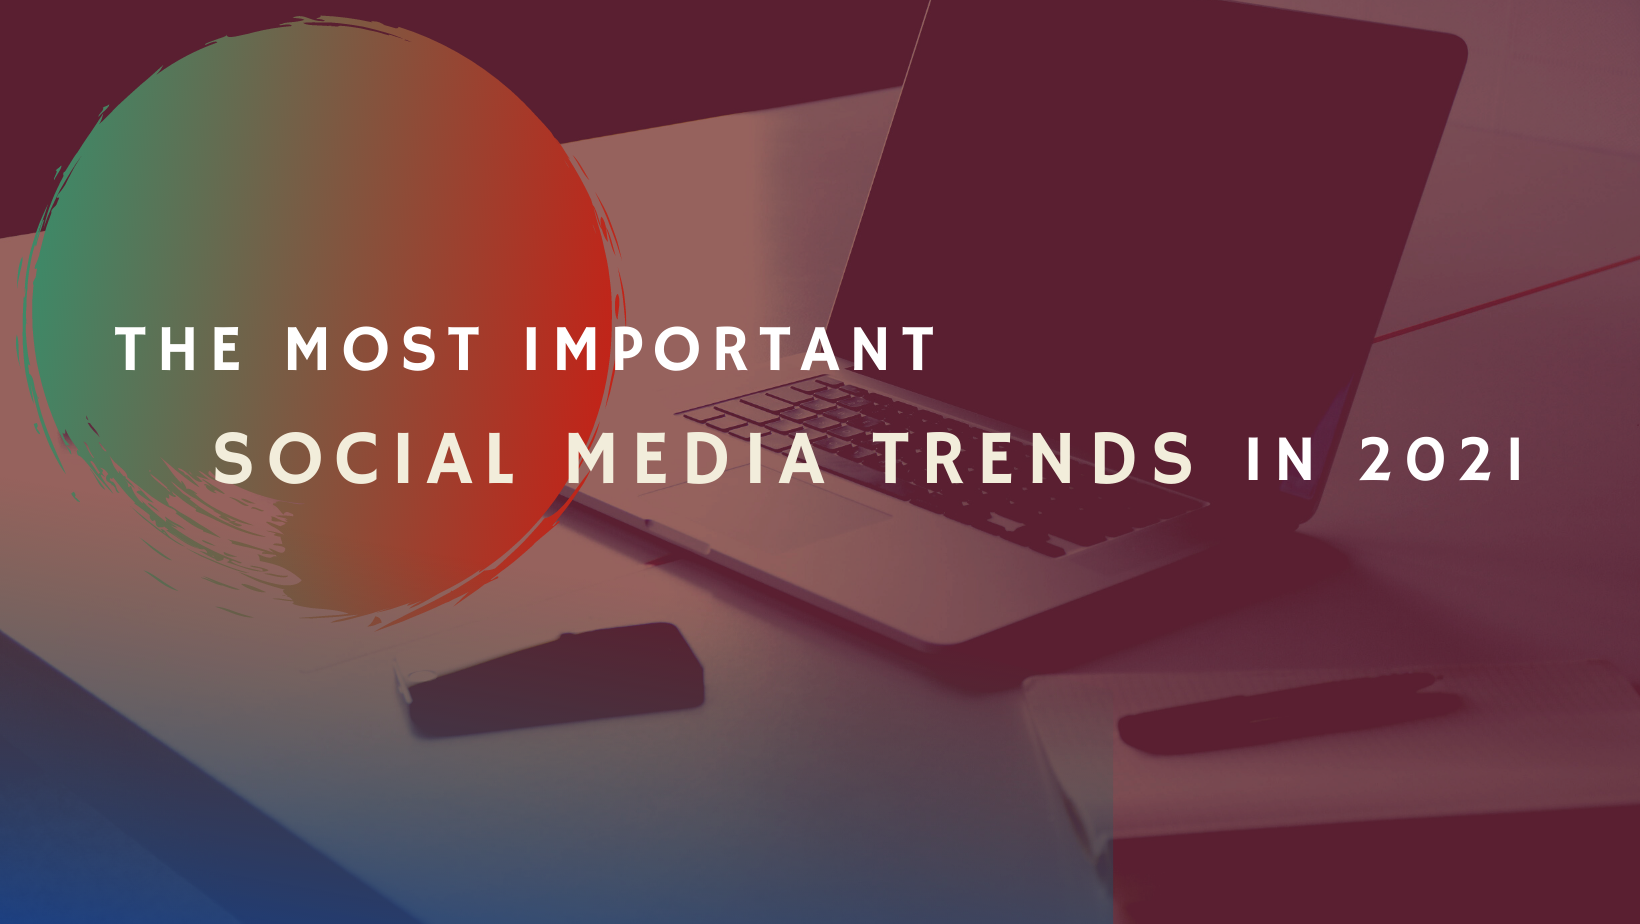 The most important social media trends in 2021